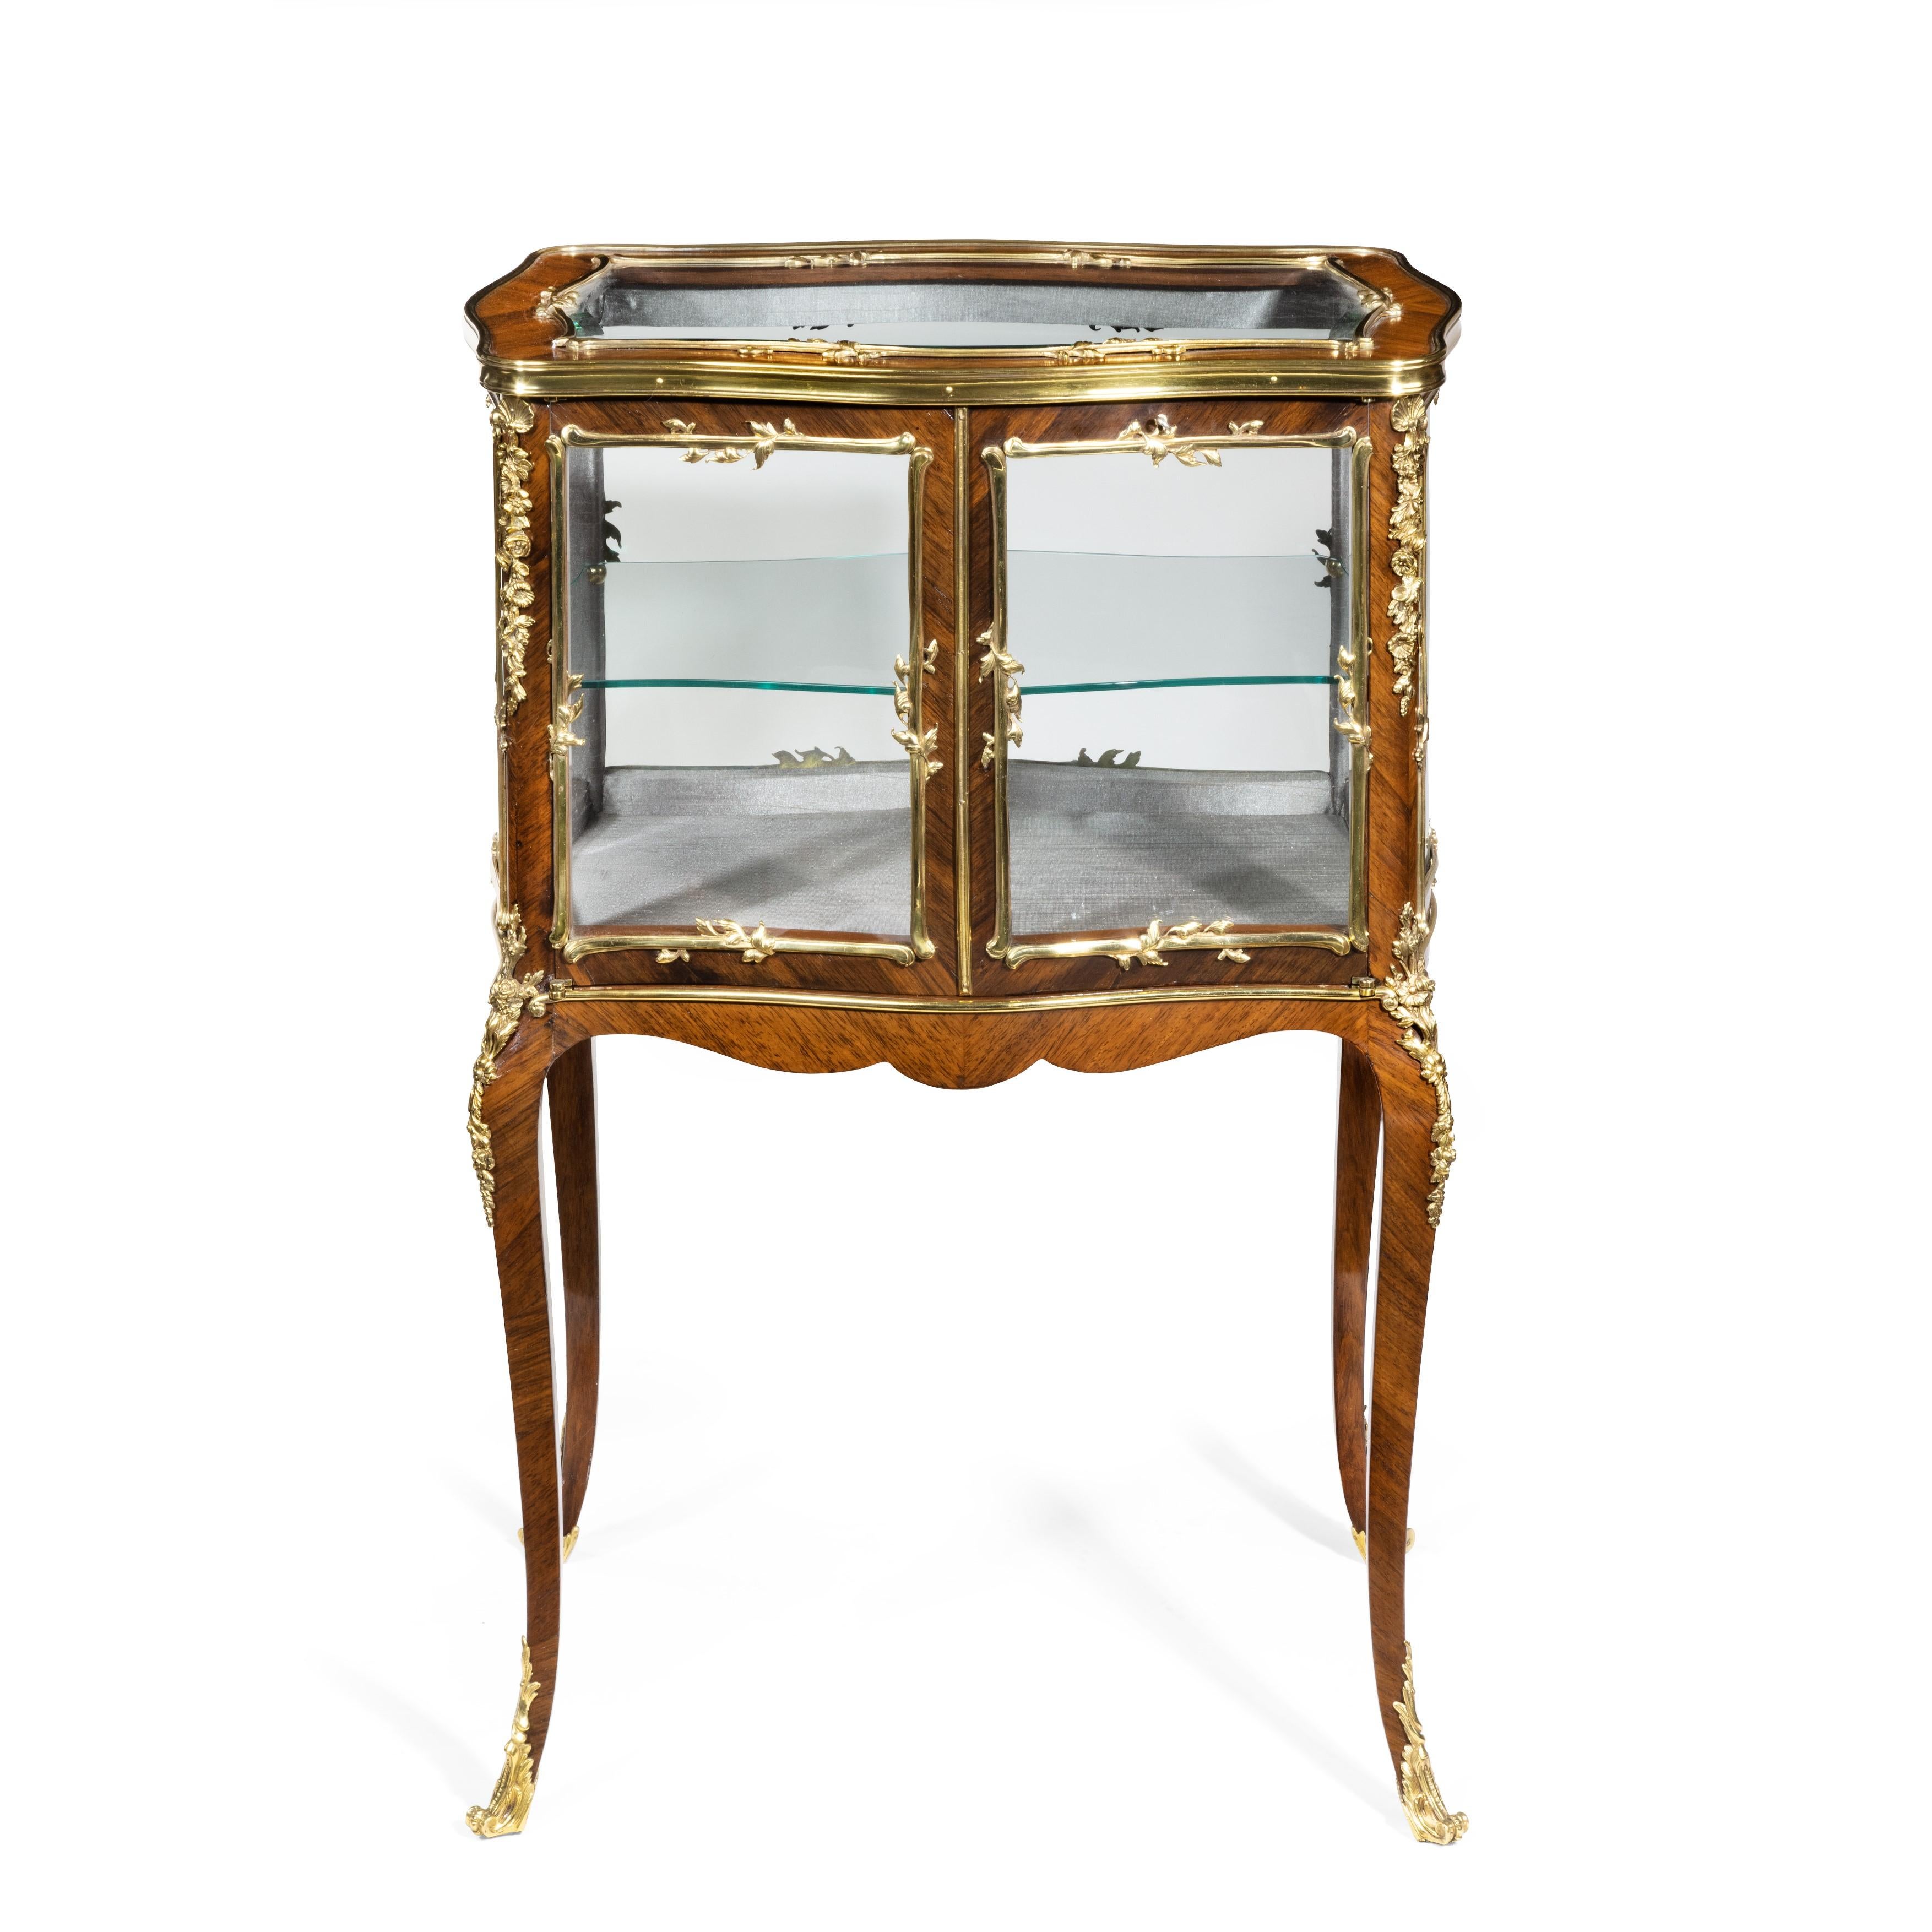 A Napoleon III kingwood bijouterie table, of serpentine rectangular form with a glass top, shelf and sides, with two doors to the front, raised on slender cabriole legs, decorated throughout with cross banding and fine quality ormolu mounts of